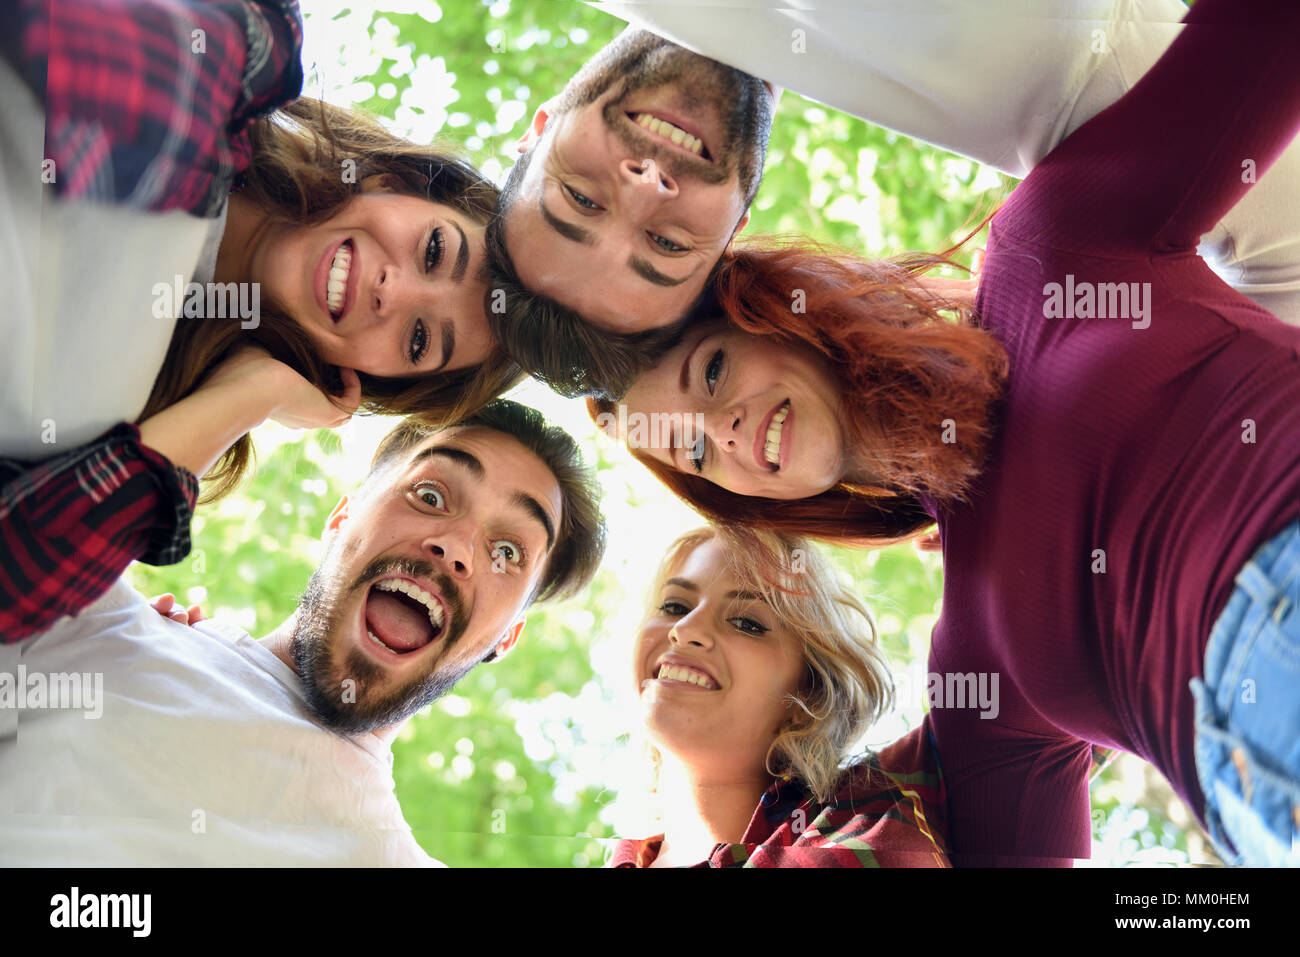 Group of young people together outdoors in urban background. Men and women looking down Stock Photo